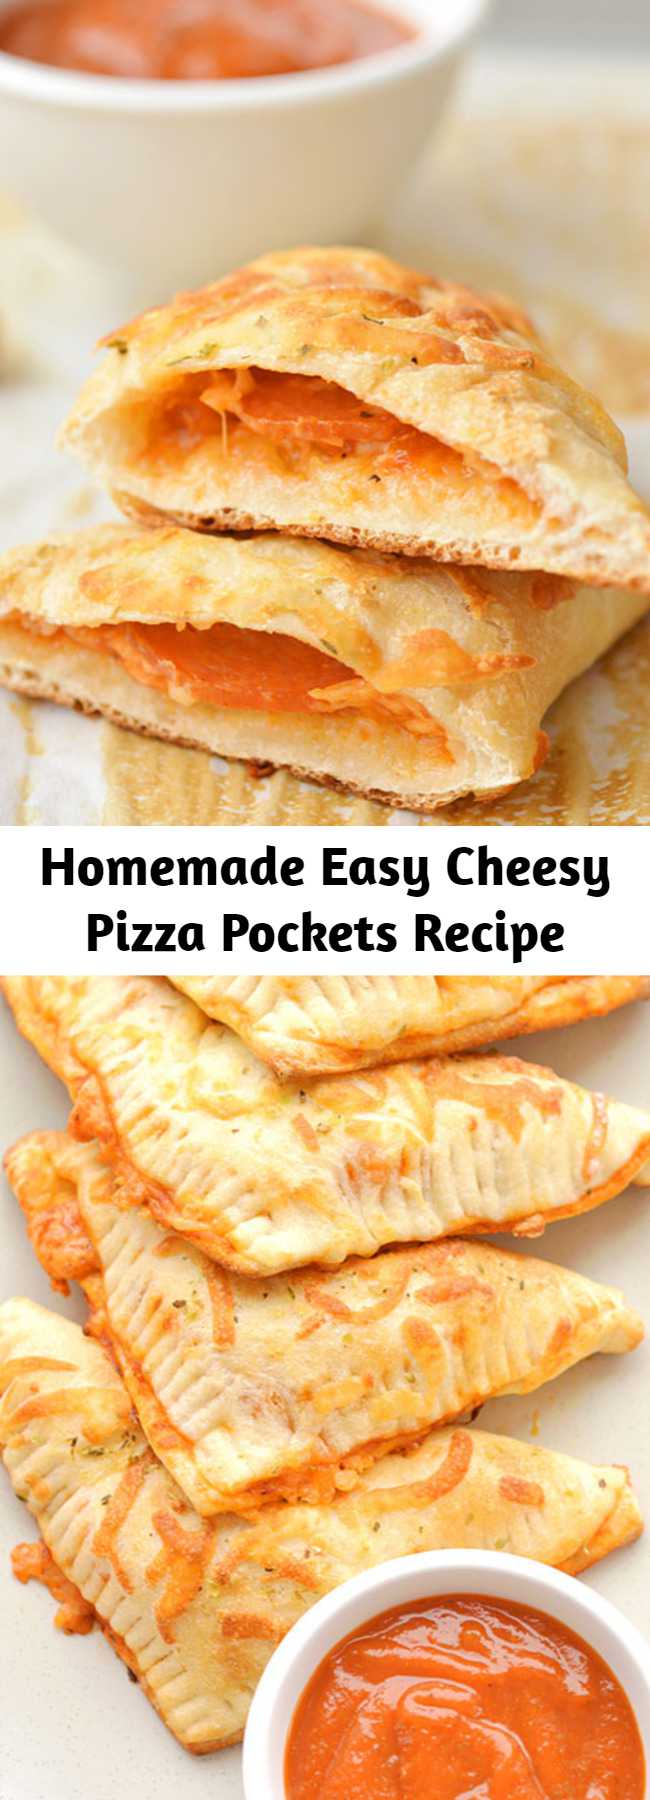 Homemade Easy Cheesy Pizza Pockets Recipe - These easy cheesy homemade pizza pockets are SO EASY and they taste amazing! You can load them with your favourite pizza toppings and in less than 20 minutes you have a fun, delicious and kid friendly meal! They're great for lunch or dinner and best of all, they're kid approved!